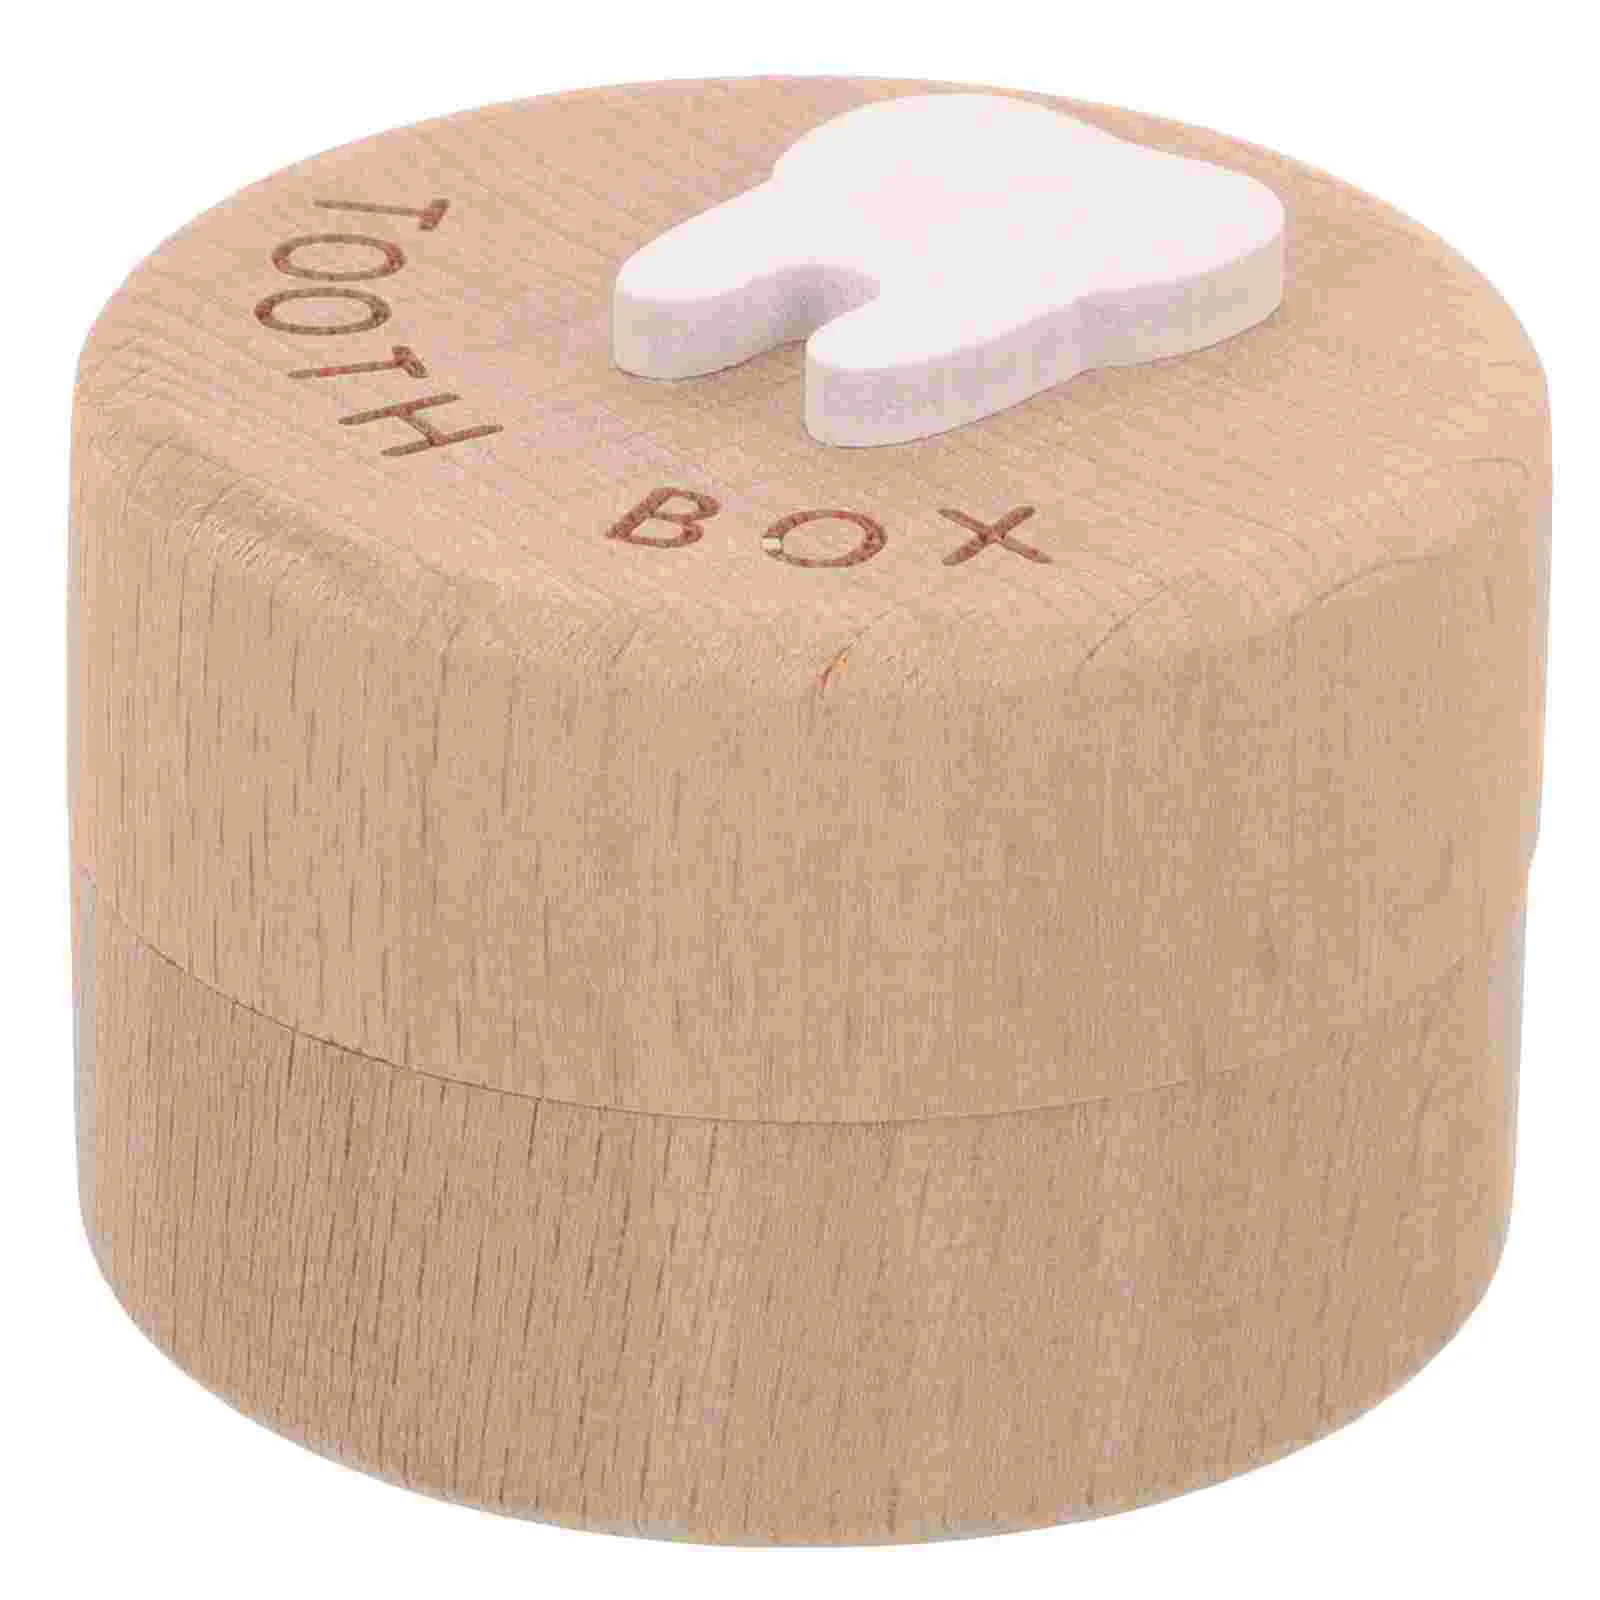 

Children's Tooth Box Wooden Storage Container Kids Teeth Holder Protector Baby Keepsake Fetal Hair Saver Changing Toddler